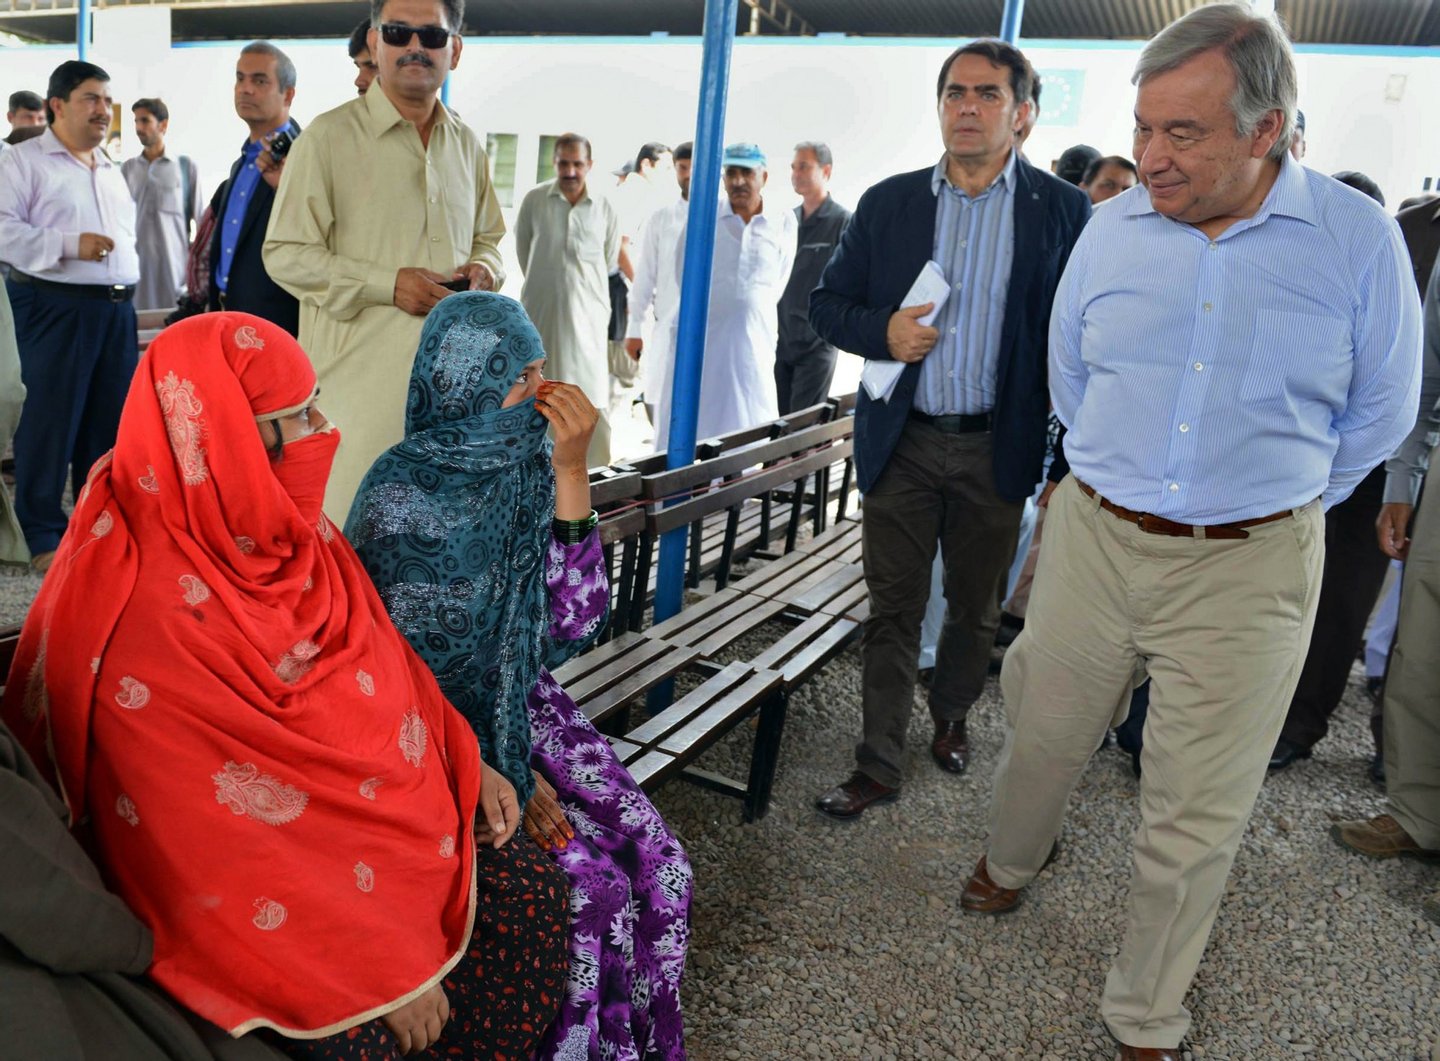 The head of the United Nations High Commissioner for Refugees (UNHCR) Antonio Guterres (R) looks on during a visit to the UNHCR repatriation centre in the north-western Pakistani city of Peshawar on June 23, 2015. Guterres is on a three-day official visit to Pakistan. AFP PHOTO / A MAJEED (Photo credit should read A Majeed/AFP/Getty Images)